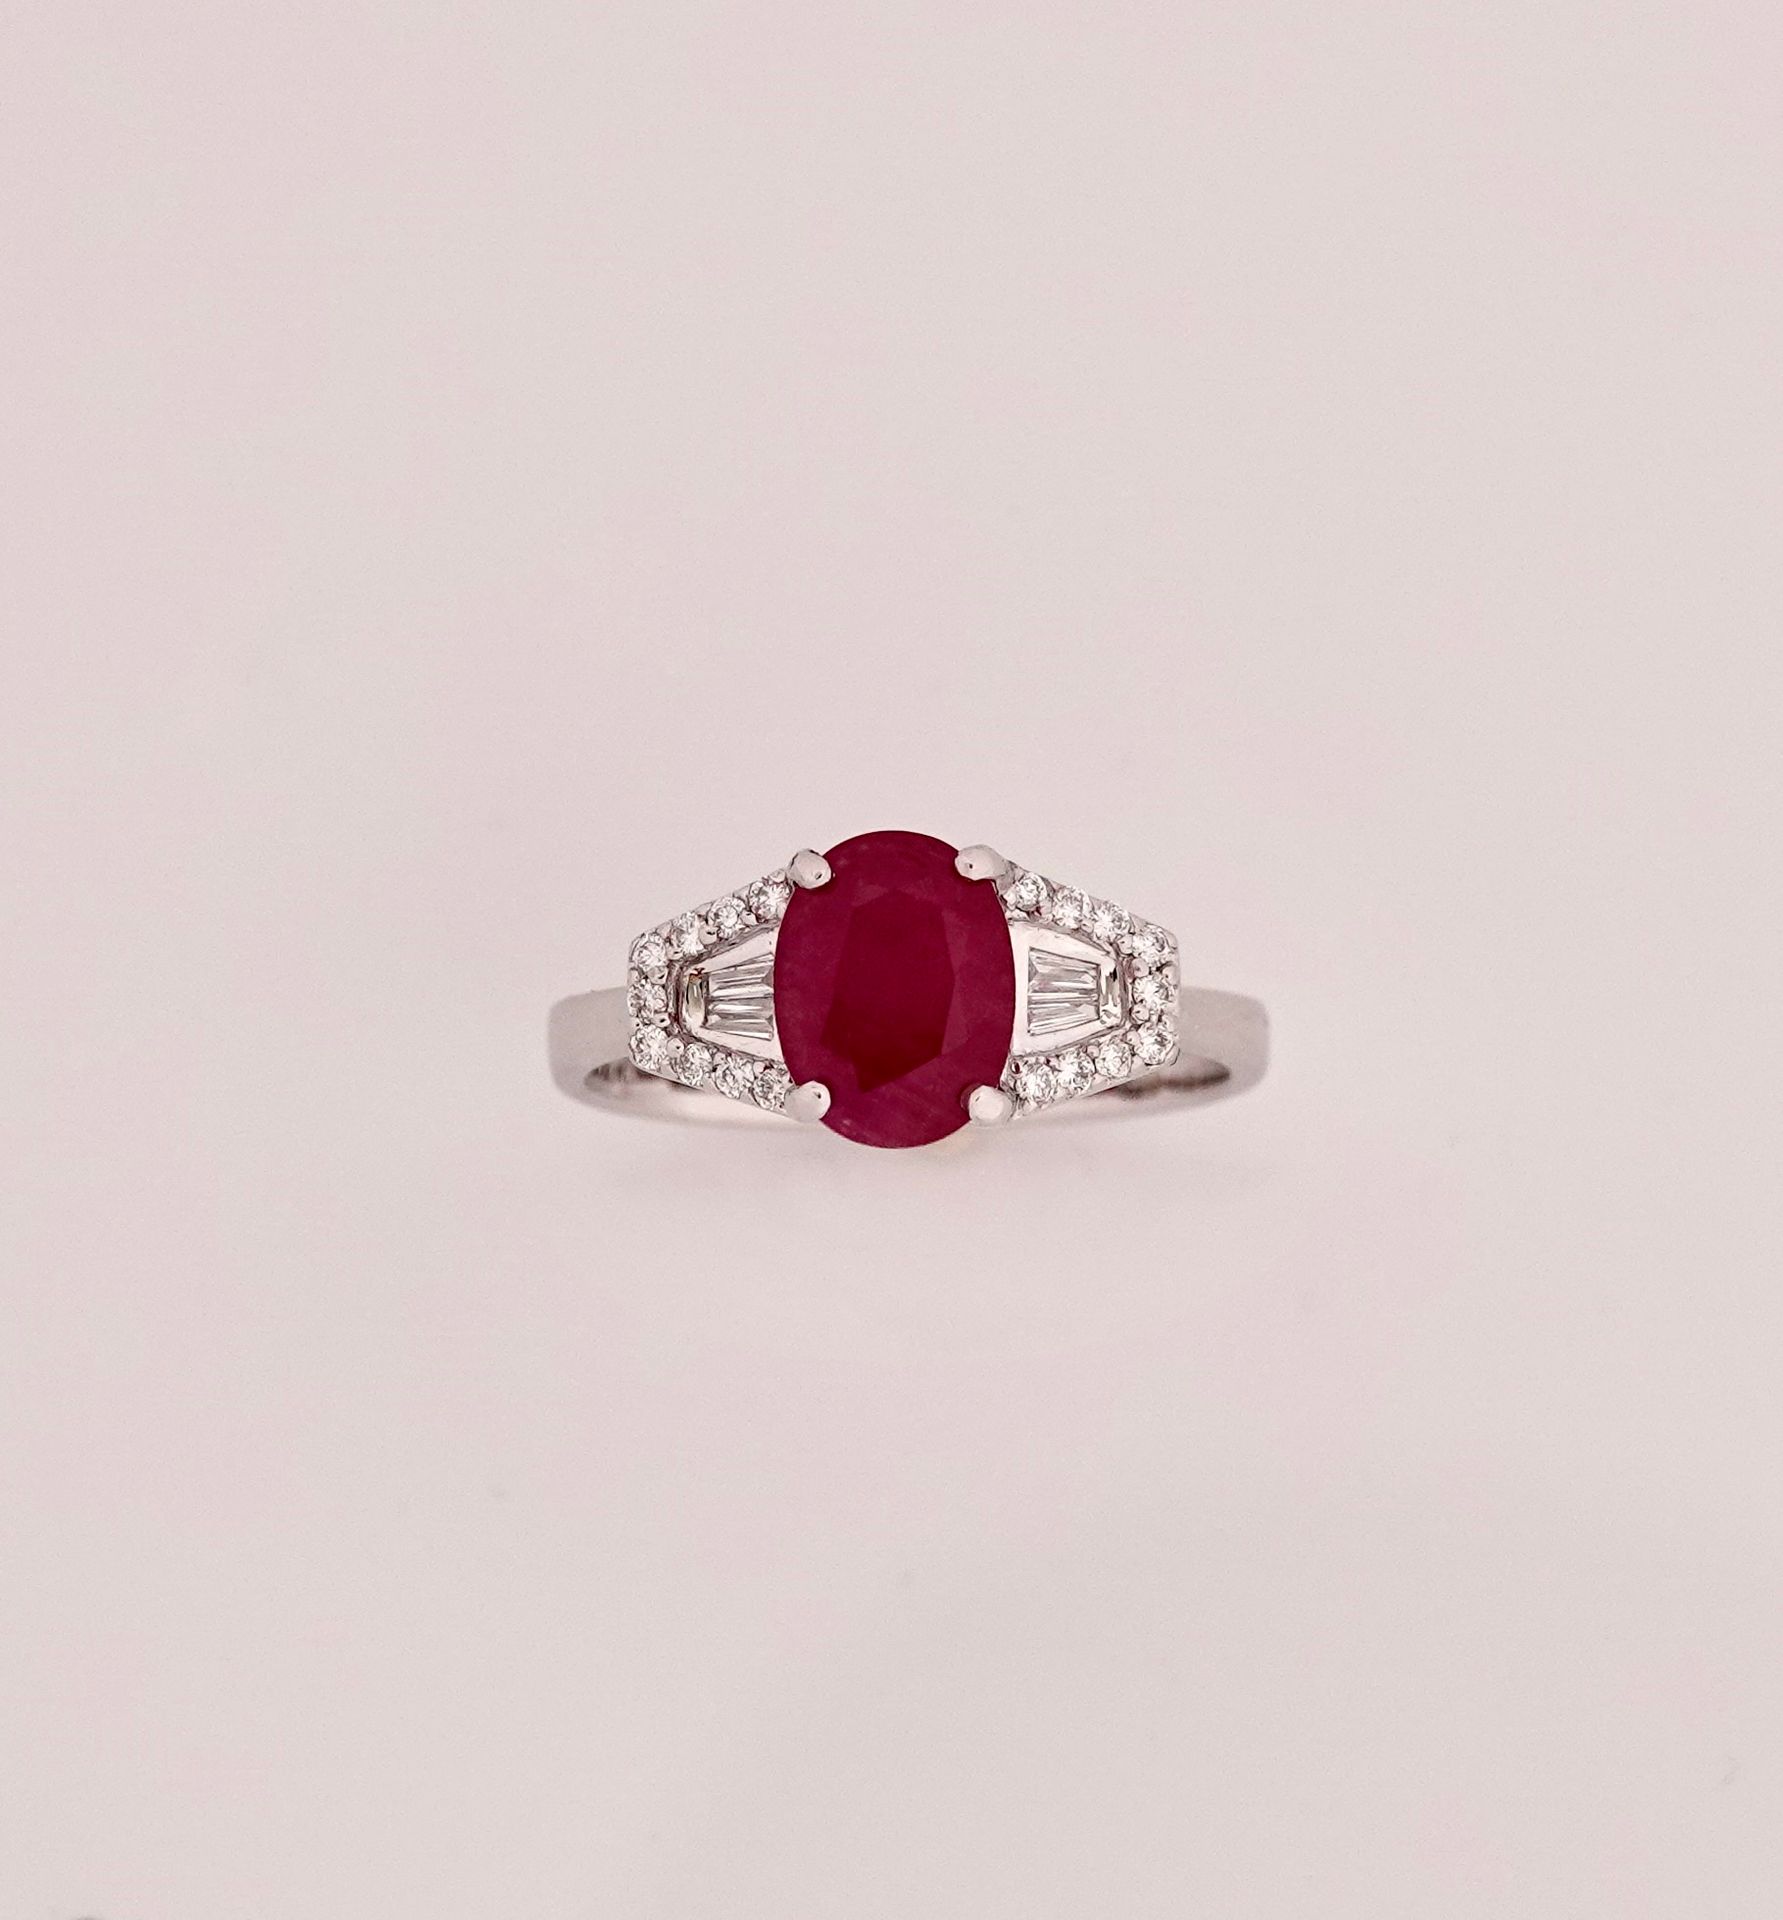 Null White gold ring, 750 MM, set with an oval ruby weighing 2.06 carats between&hellip;